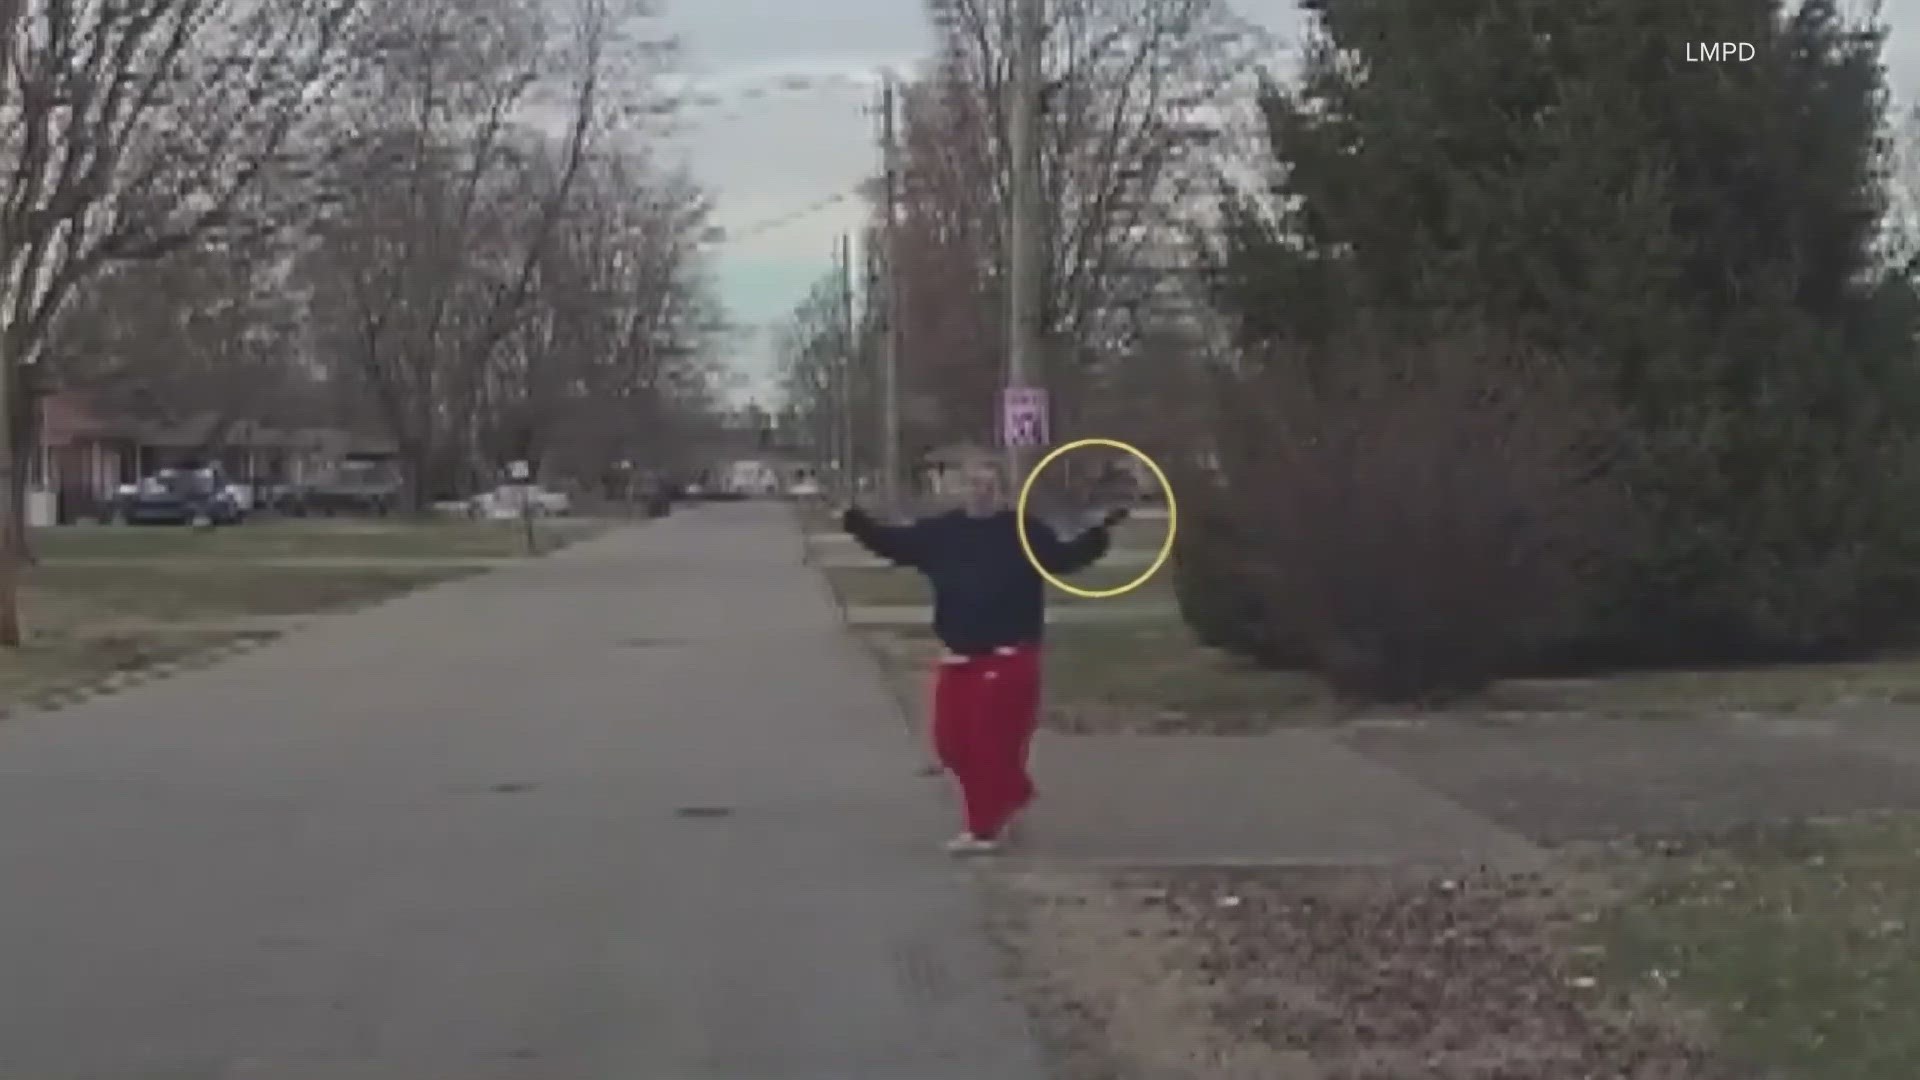 The footage shows when officers ordered the woman, Candy Basil, to drop her weapon.